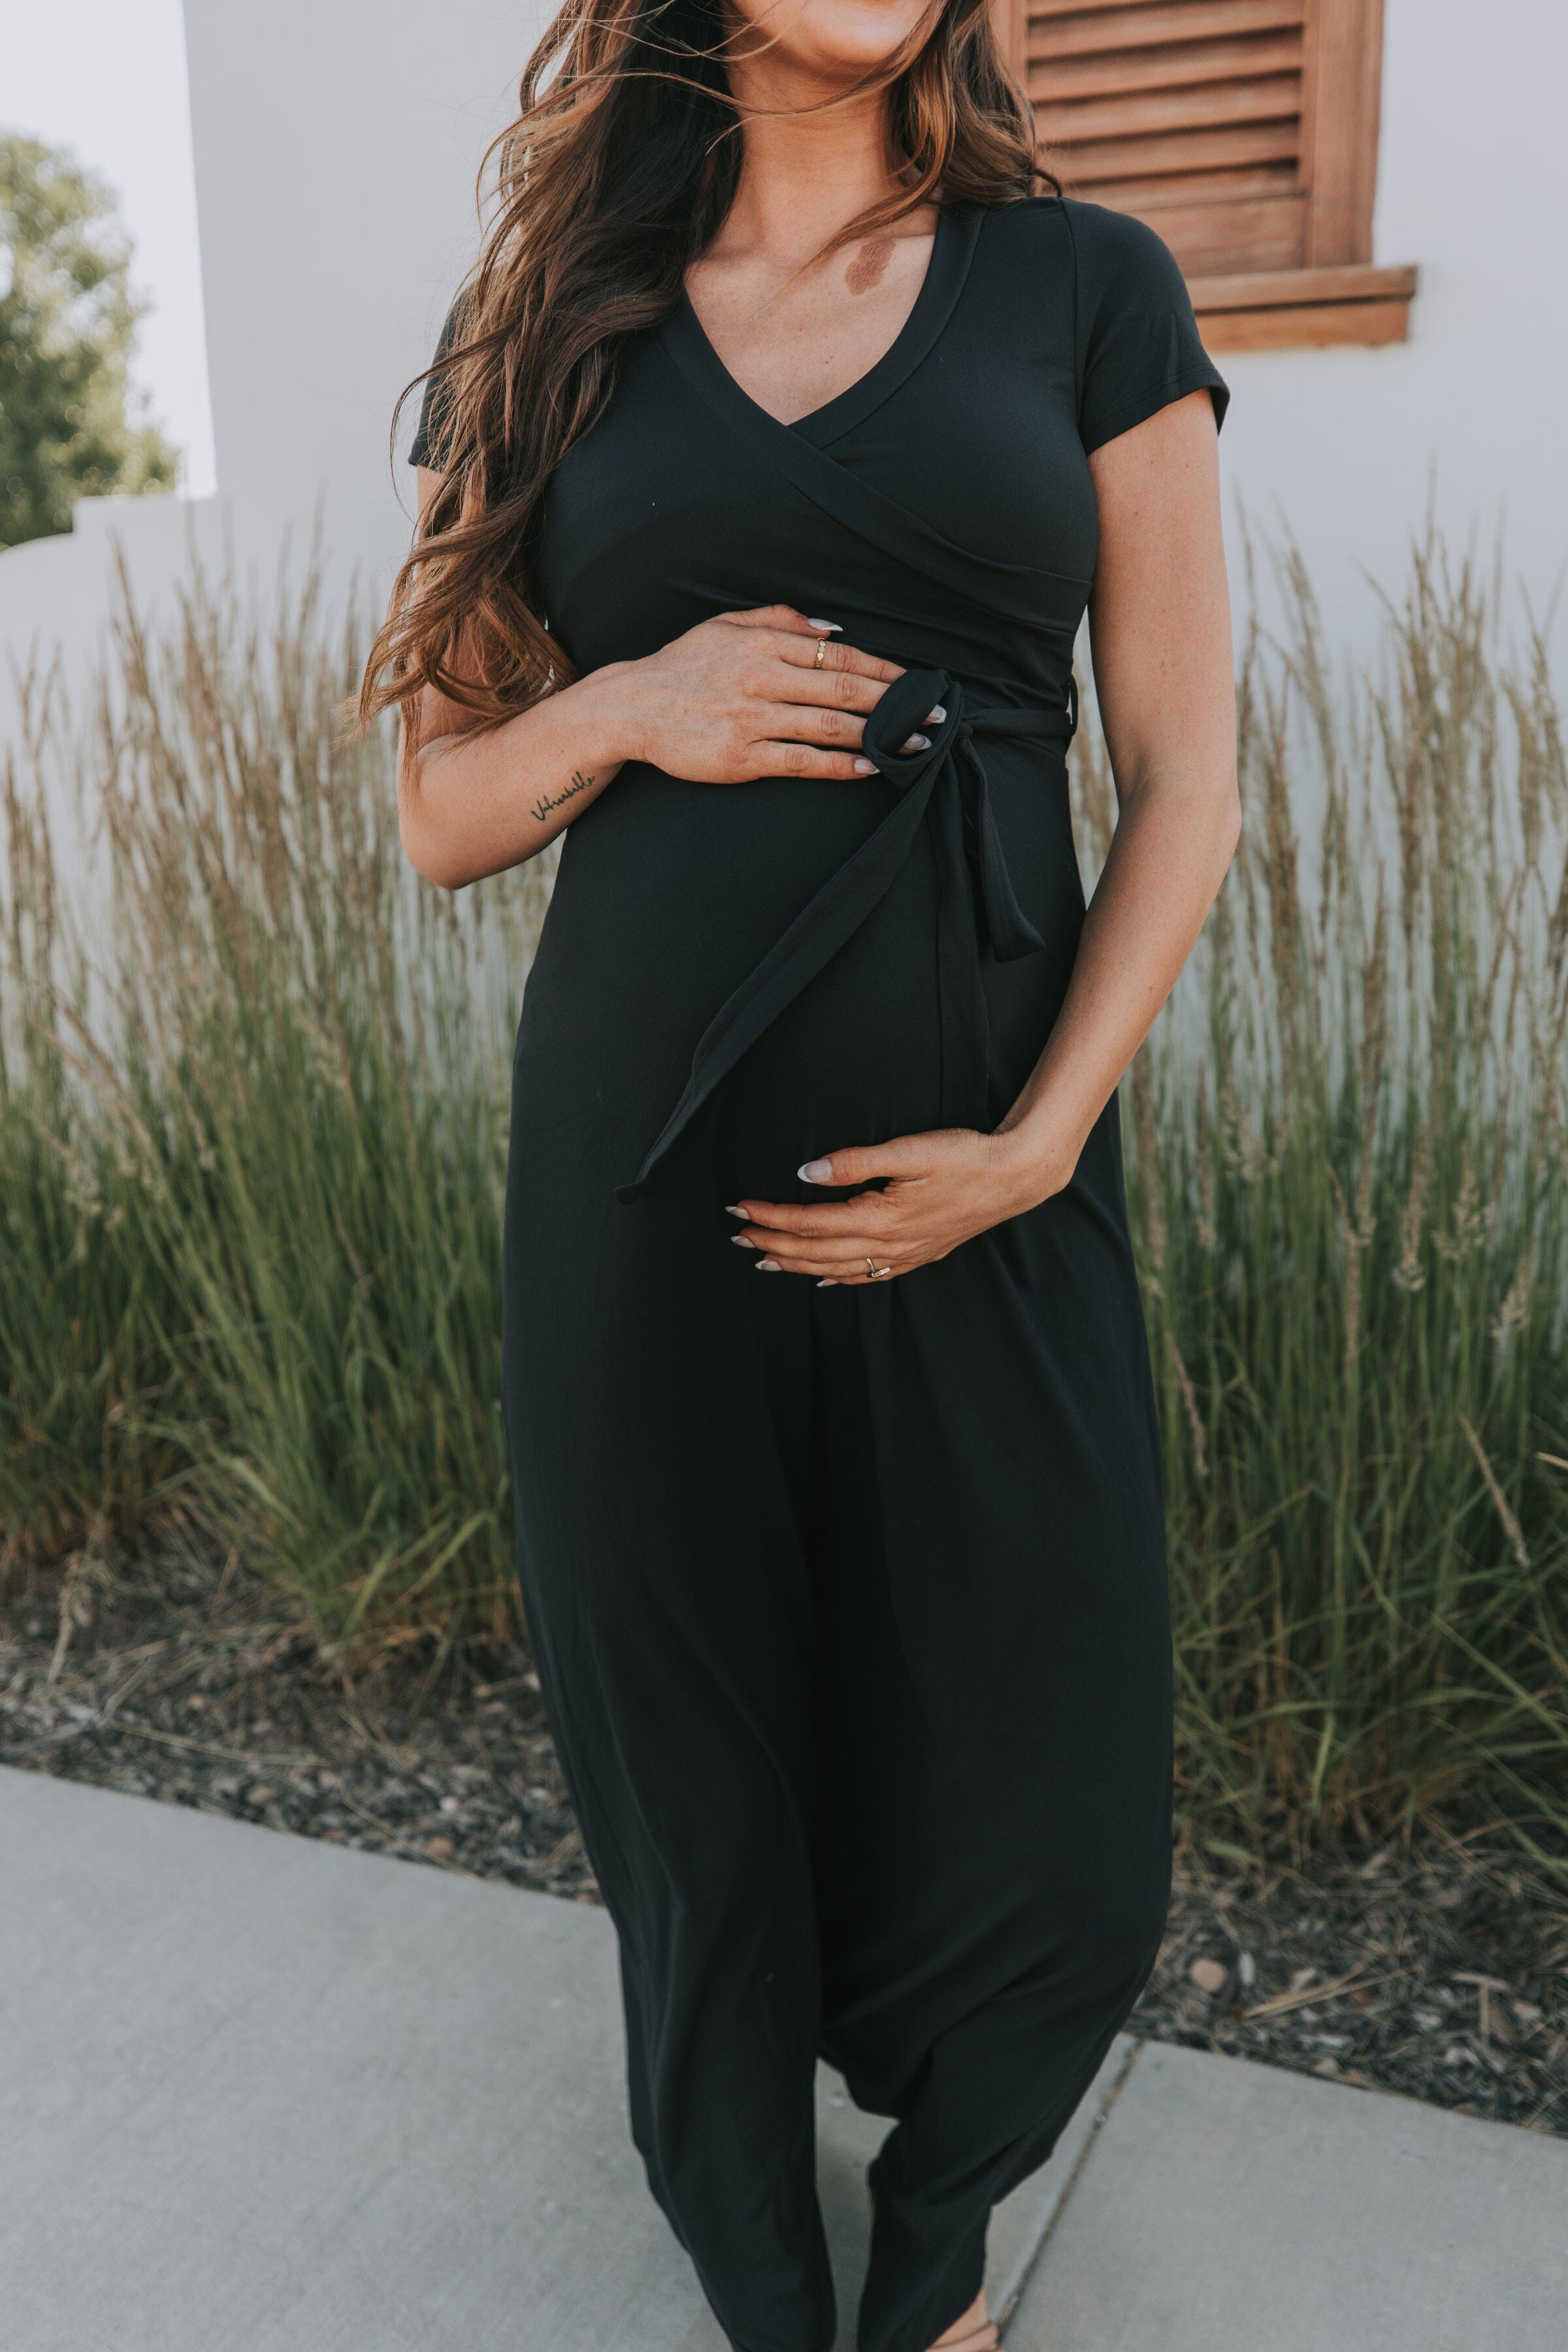 New Addition Maternity Dress - 4 Colors 